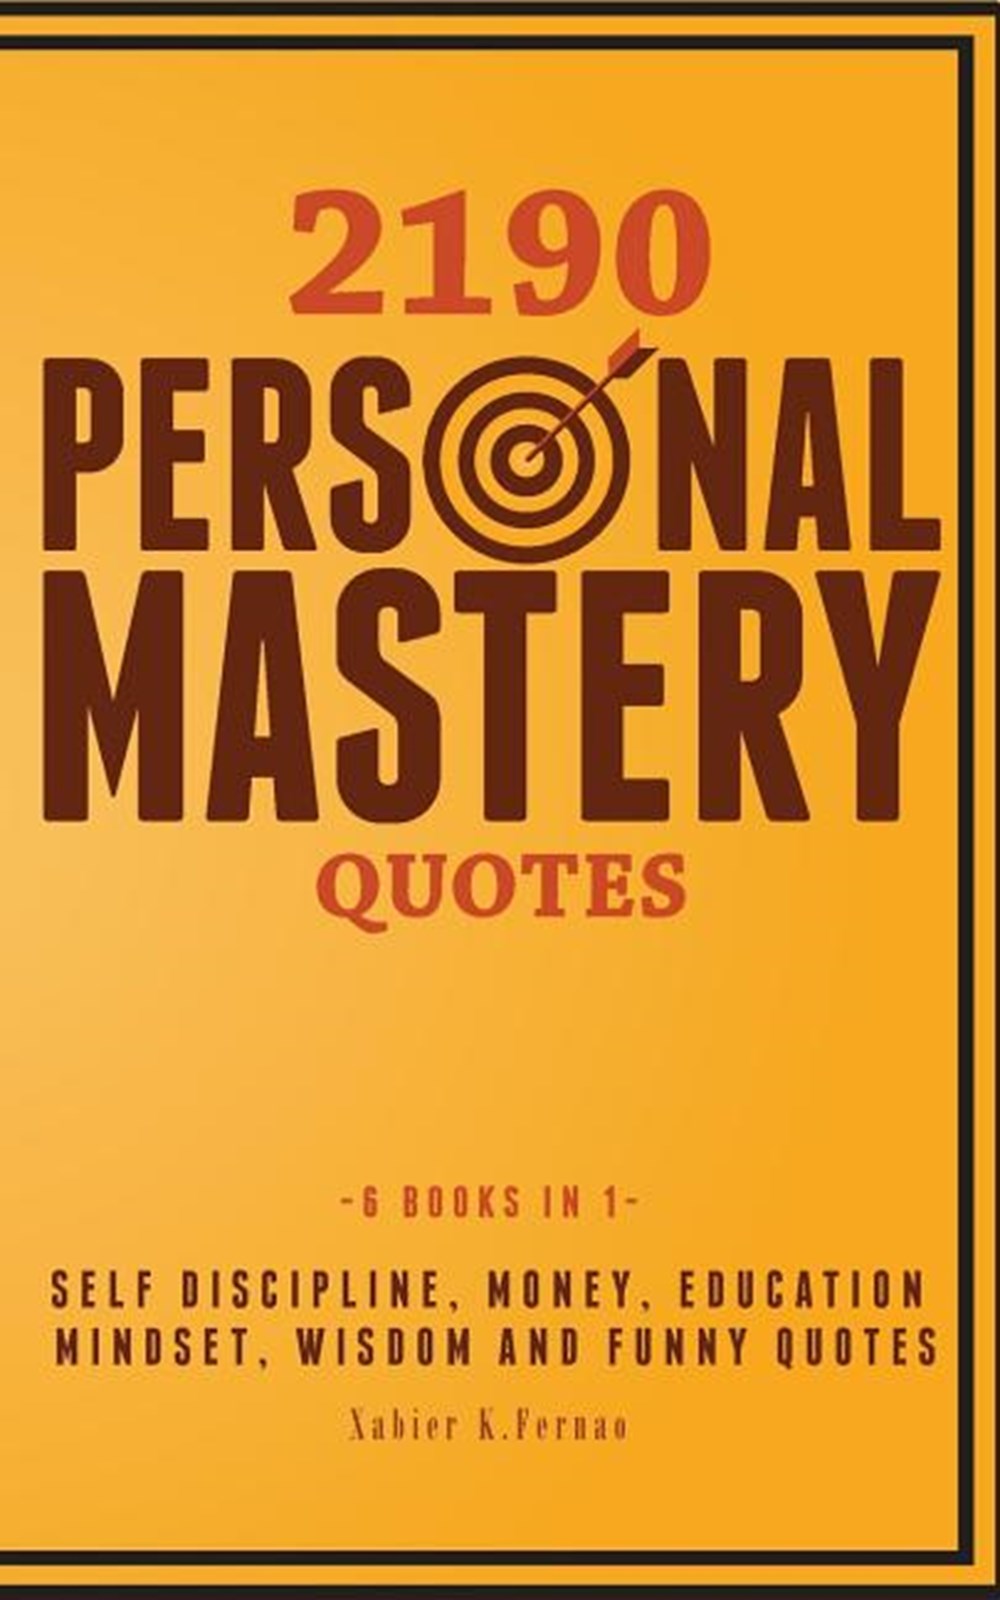 2190 Personal Mastery Quotes: Self Discipline, Money, Education, Mindset, Wisdom and Funny Quotes